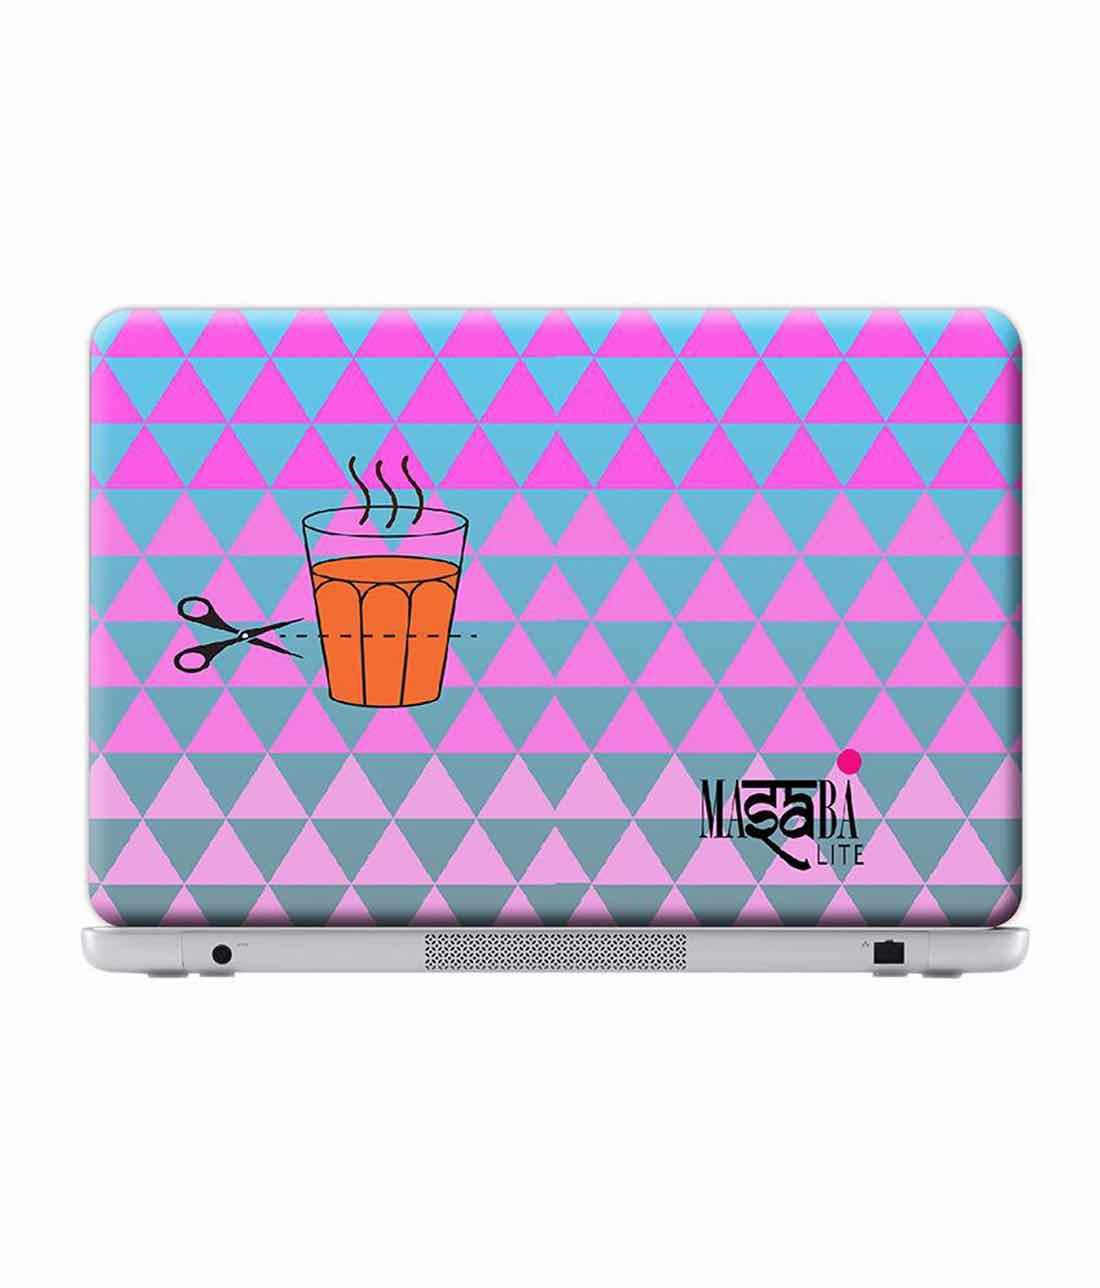 Buy Masaba Cutting Chai Macmerise Skins For Laptop Dell Inspiron 15 5000 Series Online 